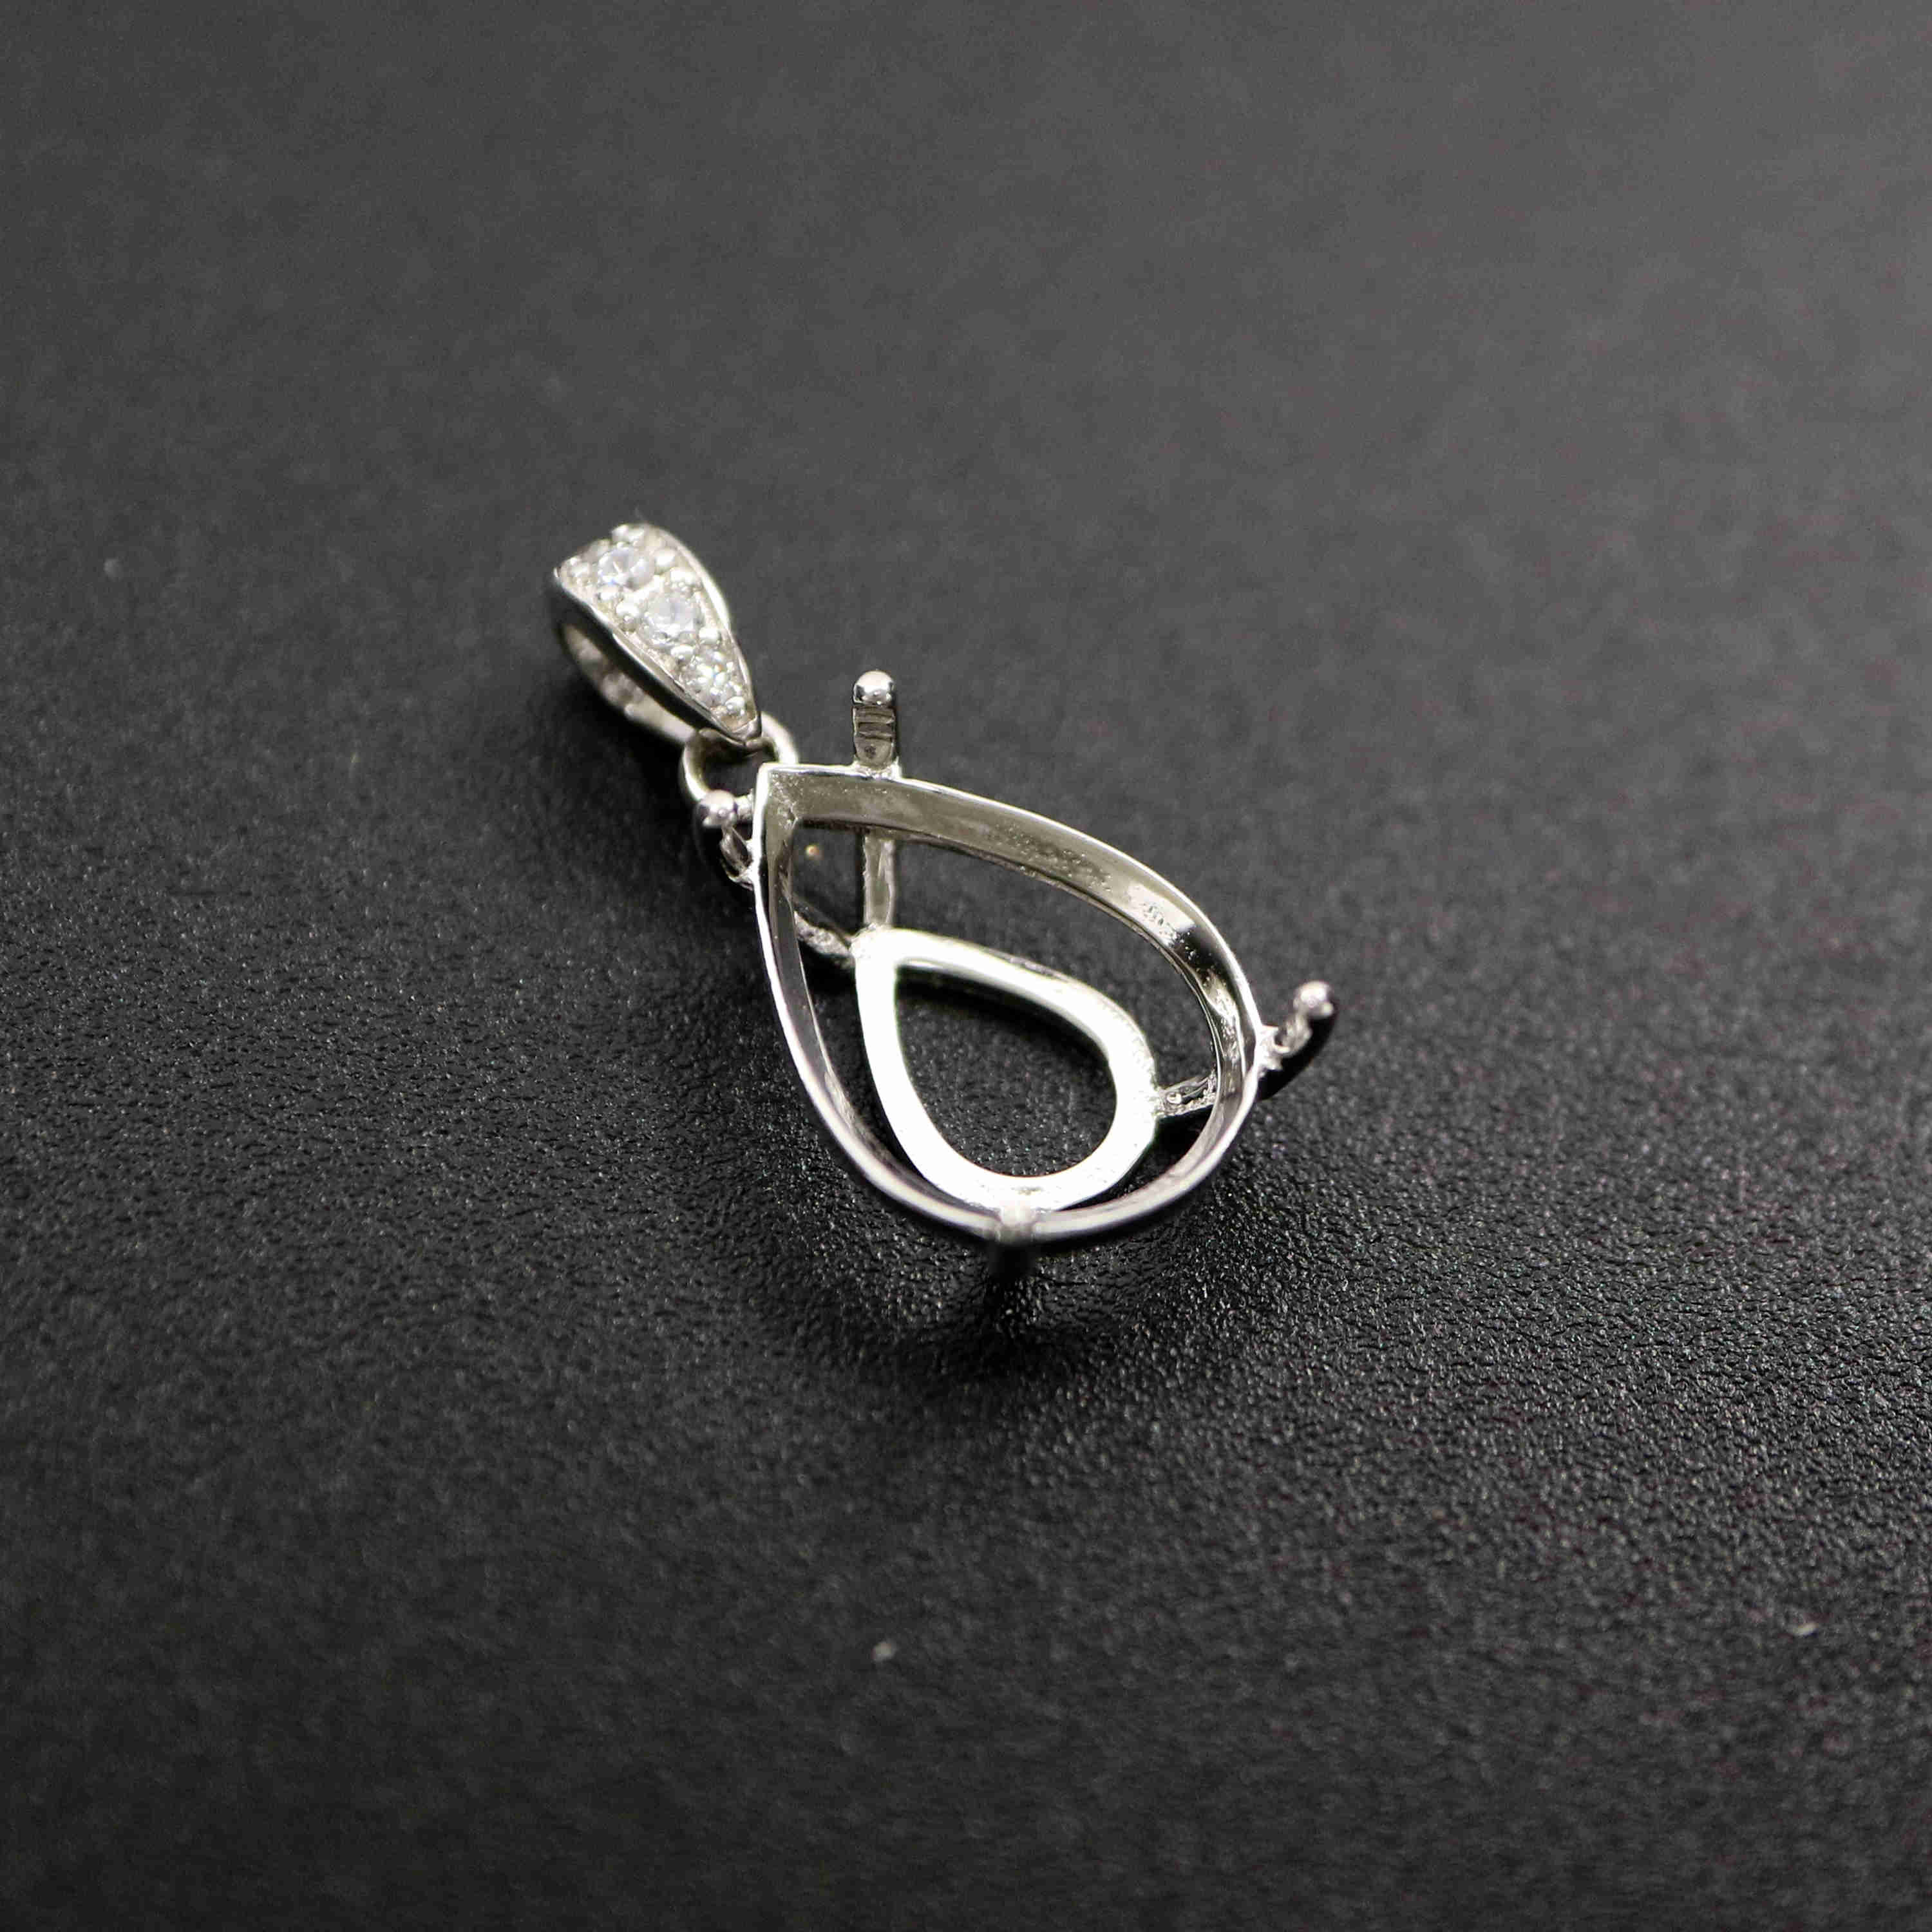 1Pcs Multiple Size Prong Bezel Settings For Tear Pear Drop Shape Gems Facted Cz Stone Solid 925 Sterling Silver DIY Pendant Charm Settings Tray 1431034 - Click Image to Close